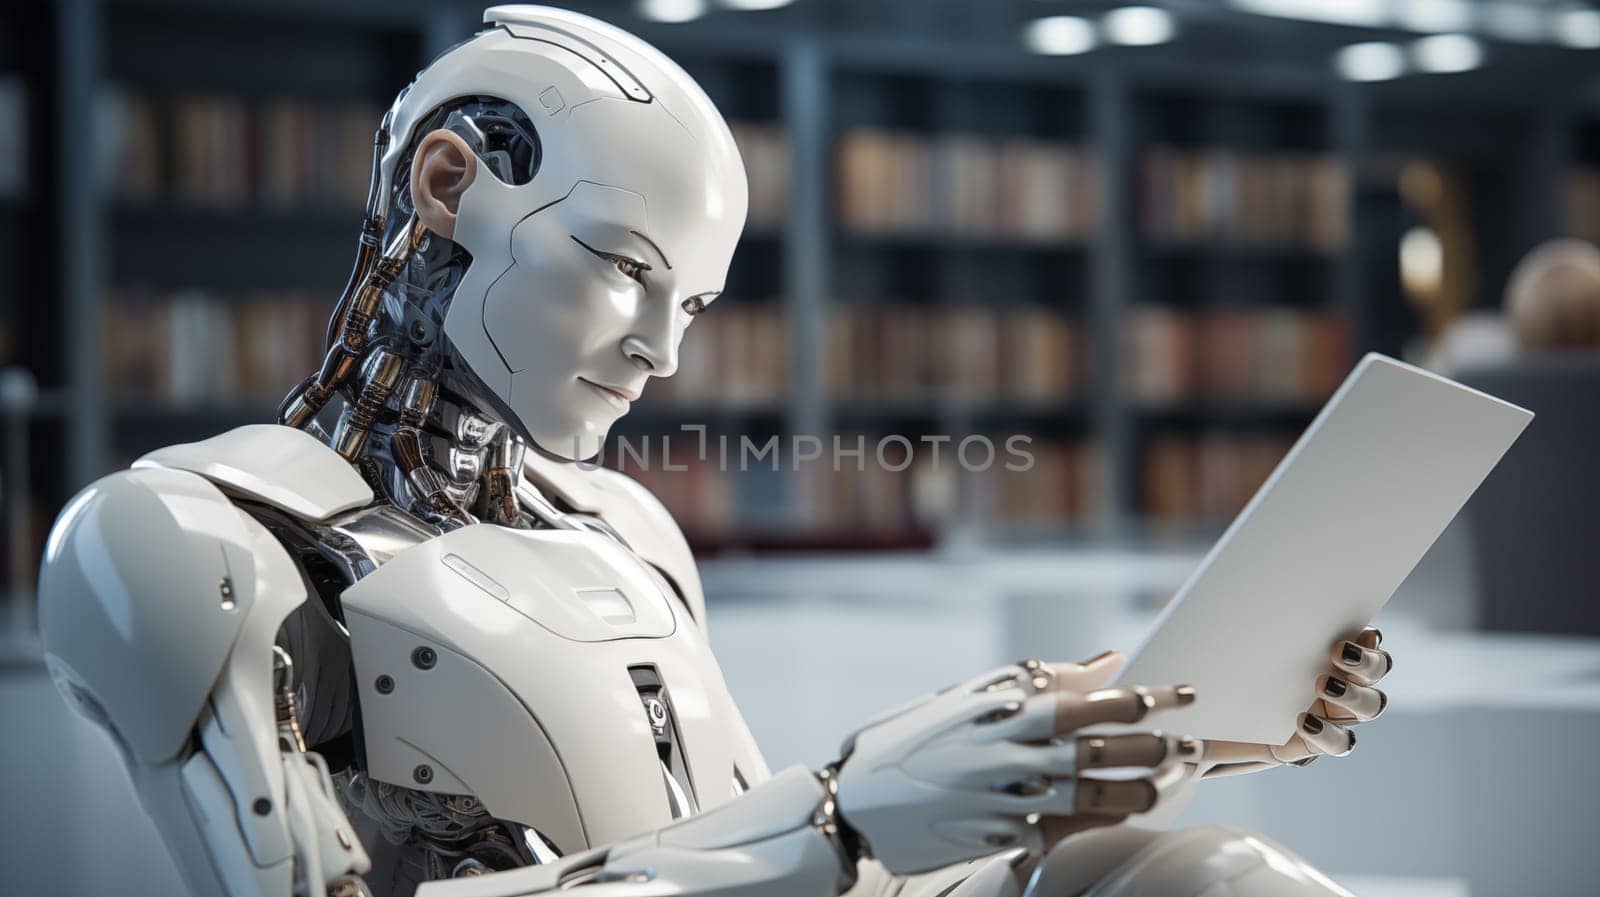 A robot with human-like facial features intently reads a document by Zakharova